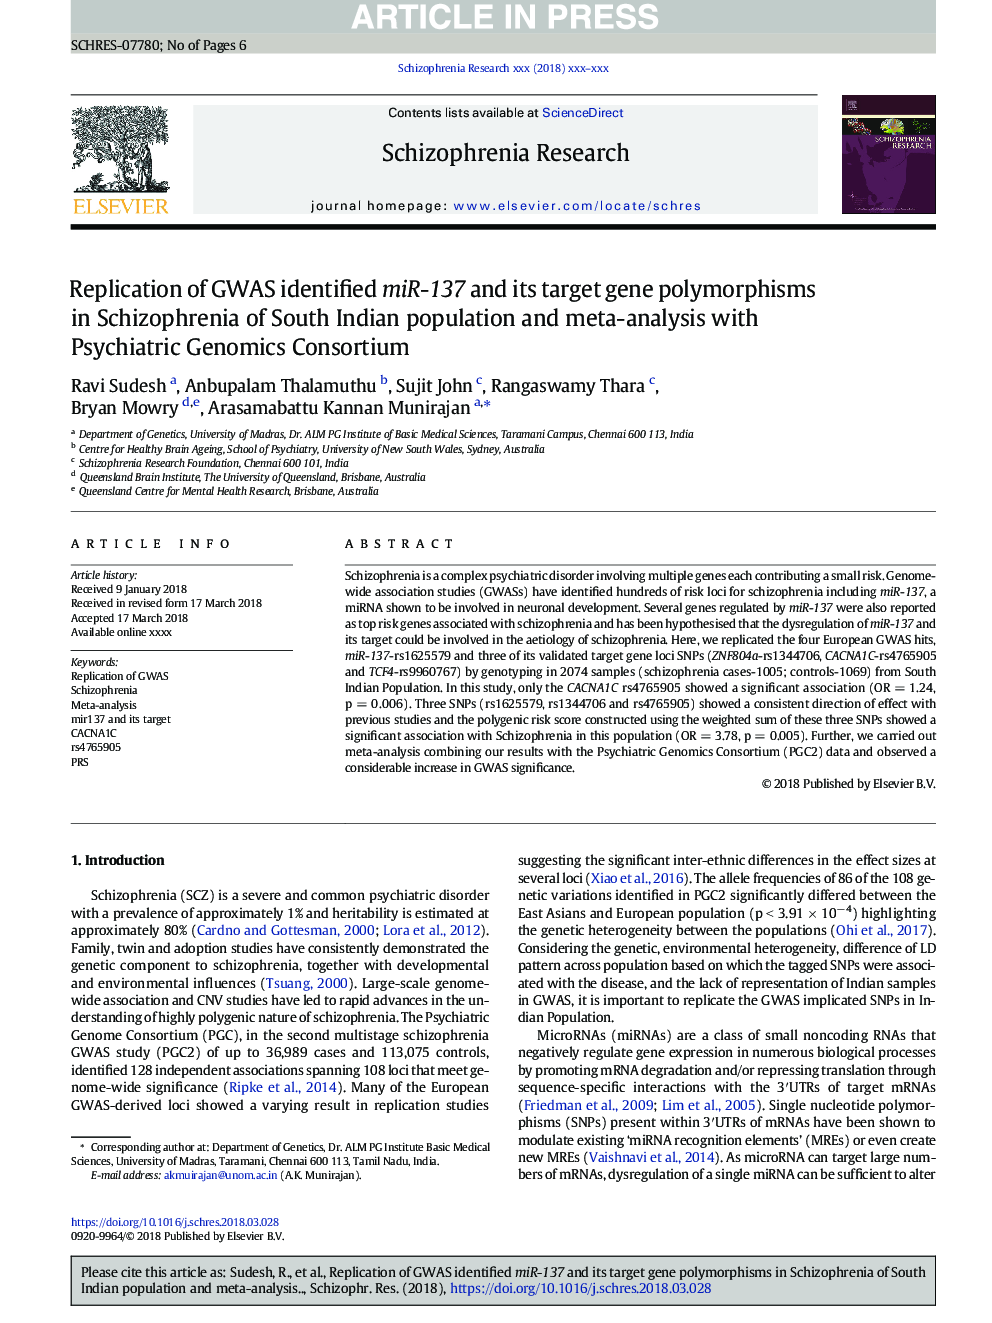 Replication of GWAS identified miR-137 and its target gene polymorphisms in Schizophrenia of South Indian population and meta-analysis with Psychiatric Genomics Consortium